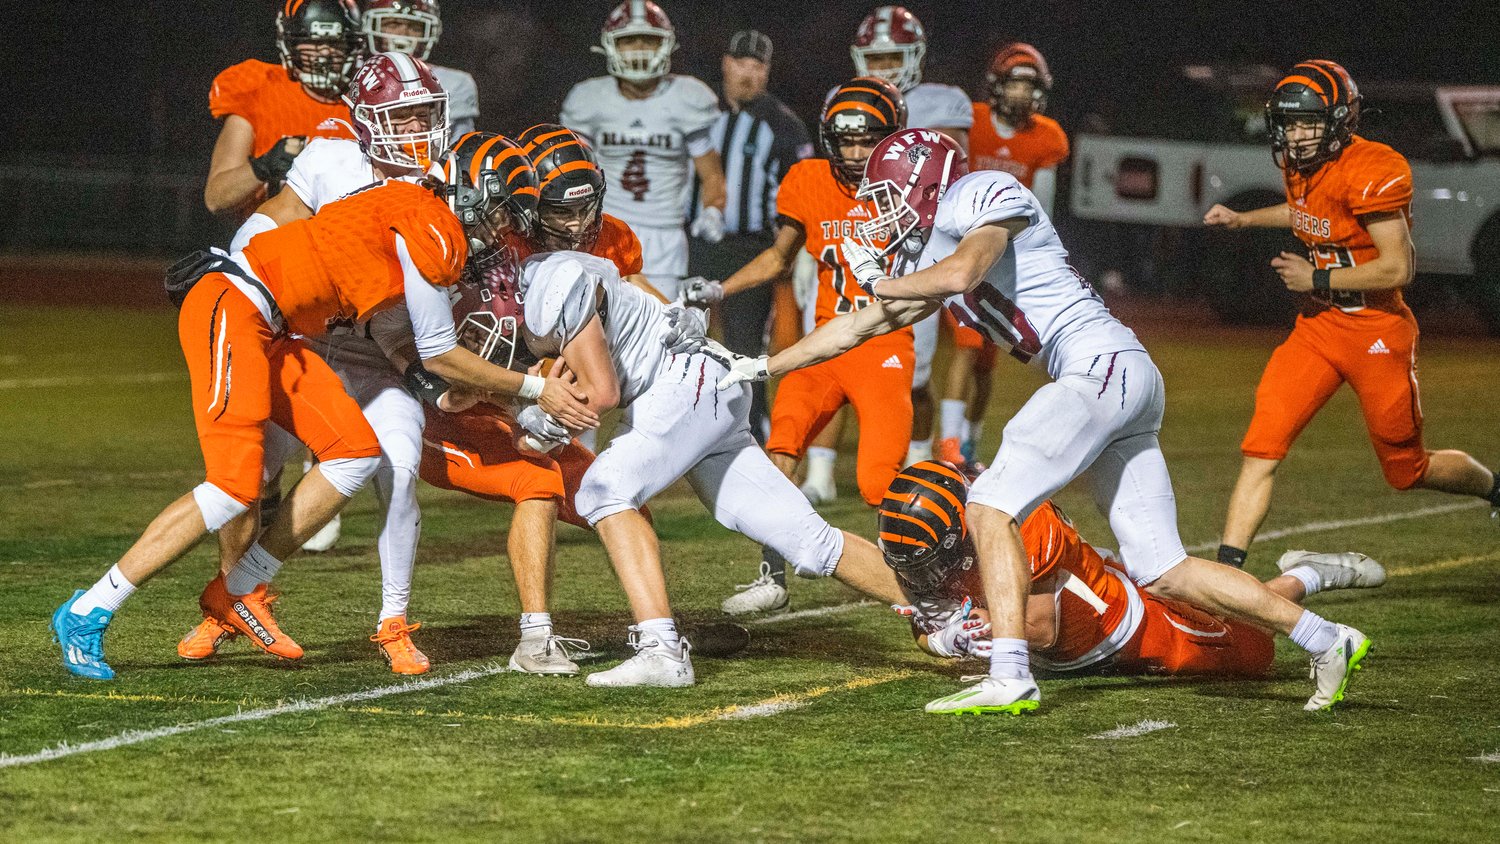 W.F. West sophomore Tucker Land (7) lowers his shoulder and crosses the goal line for a score Friday night at Tiger Stadium.